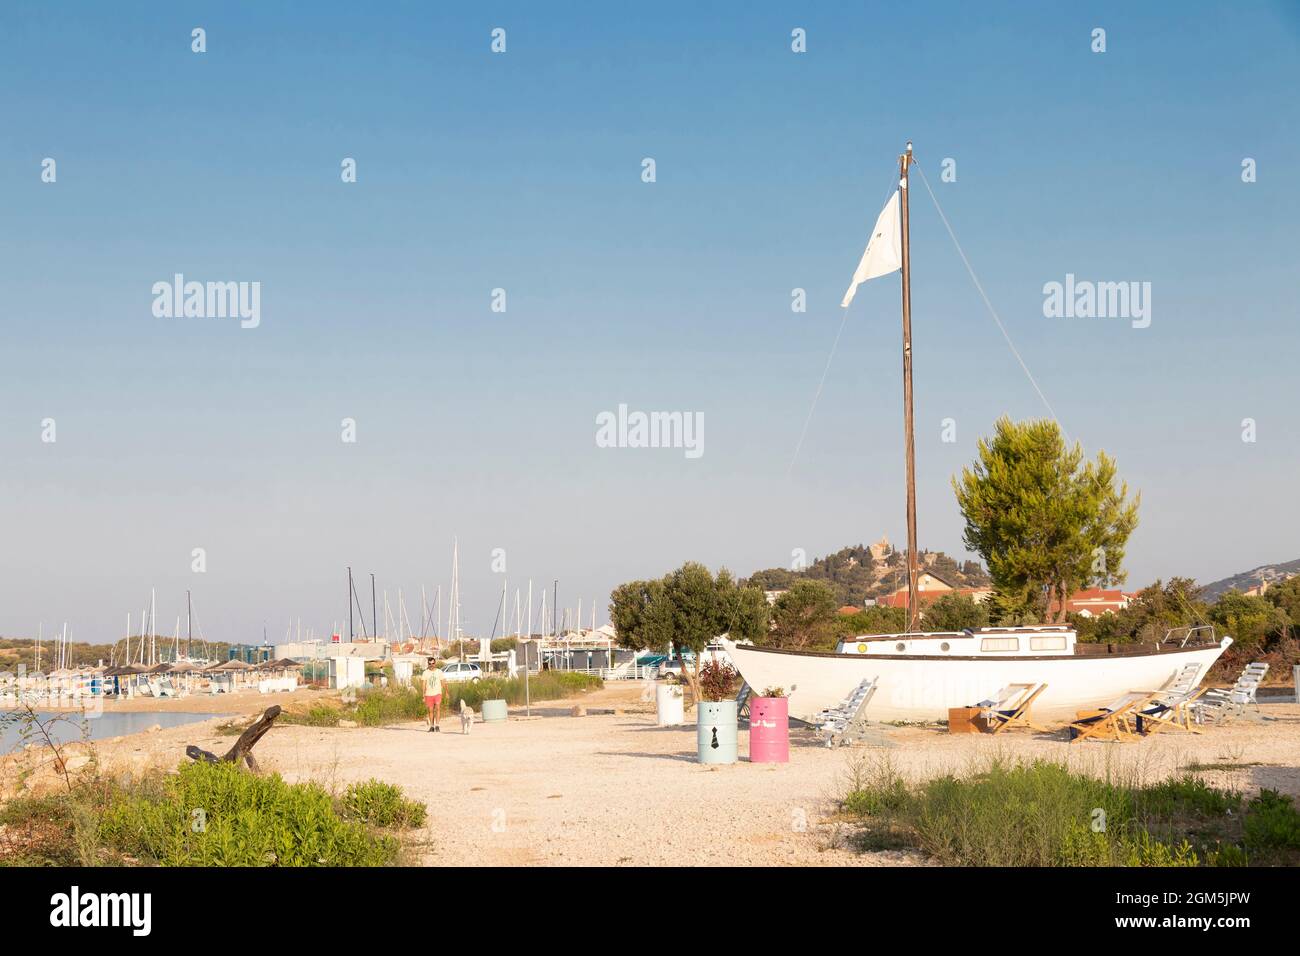 Tribunj, Croatia - August 16, 2021: Man walking a dog on the empty beach by the caffe bar with a sailing boat on the shore Stock Photo